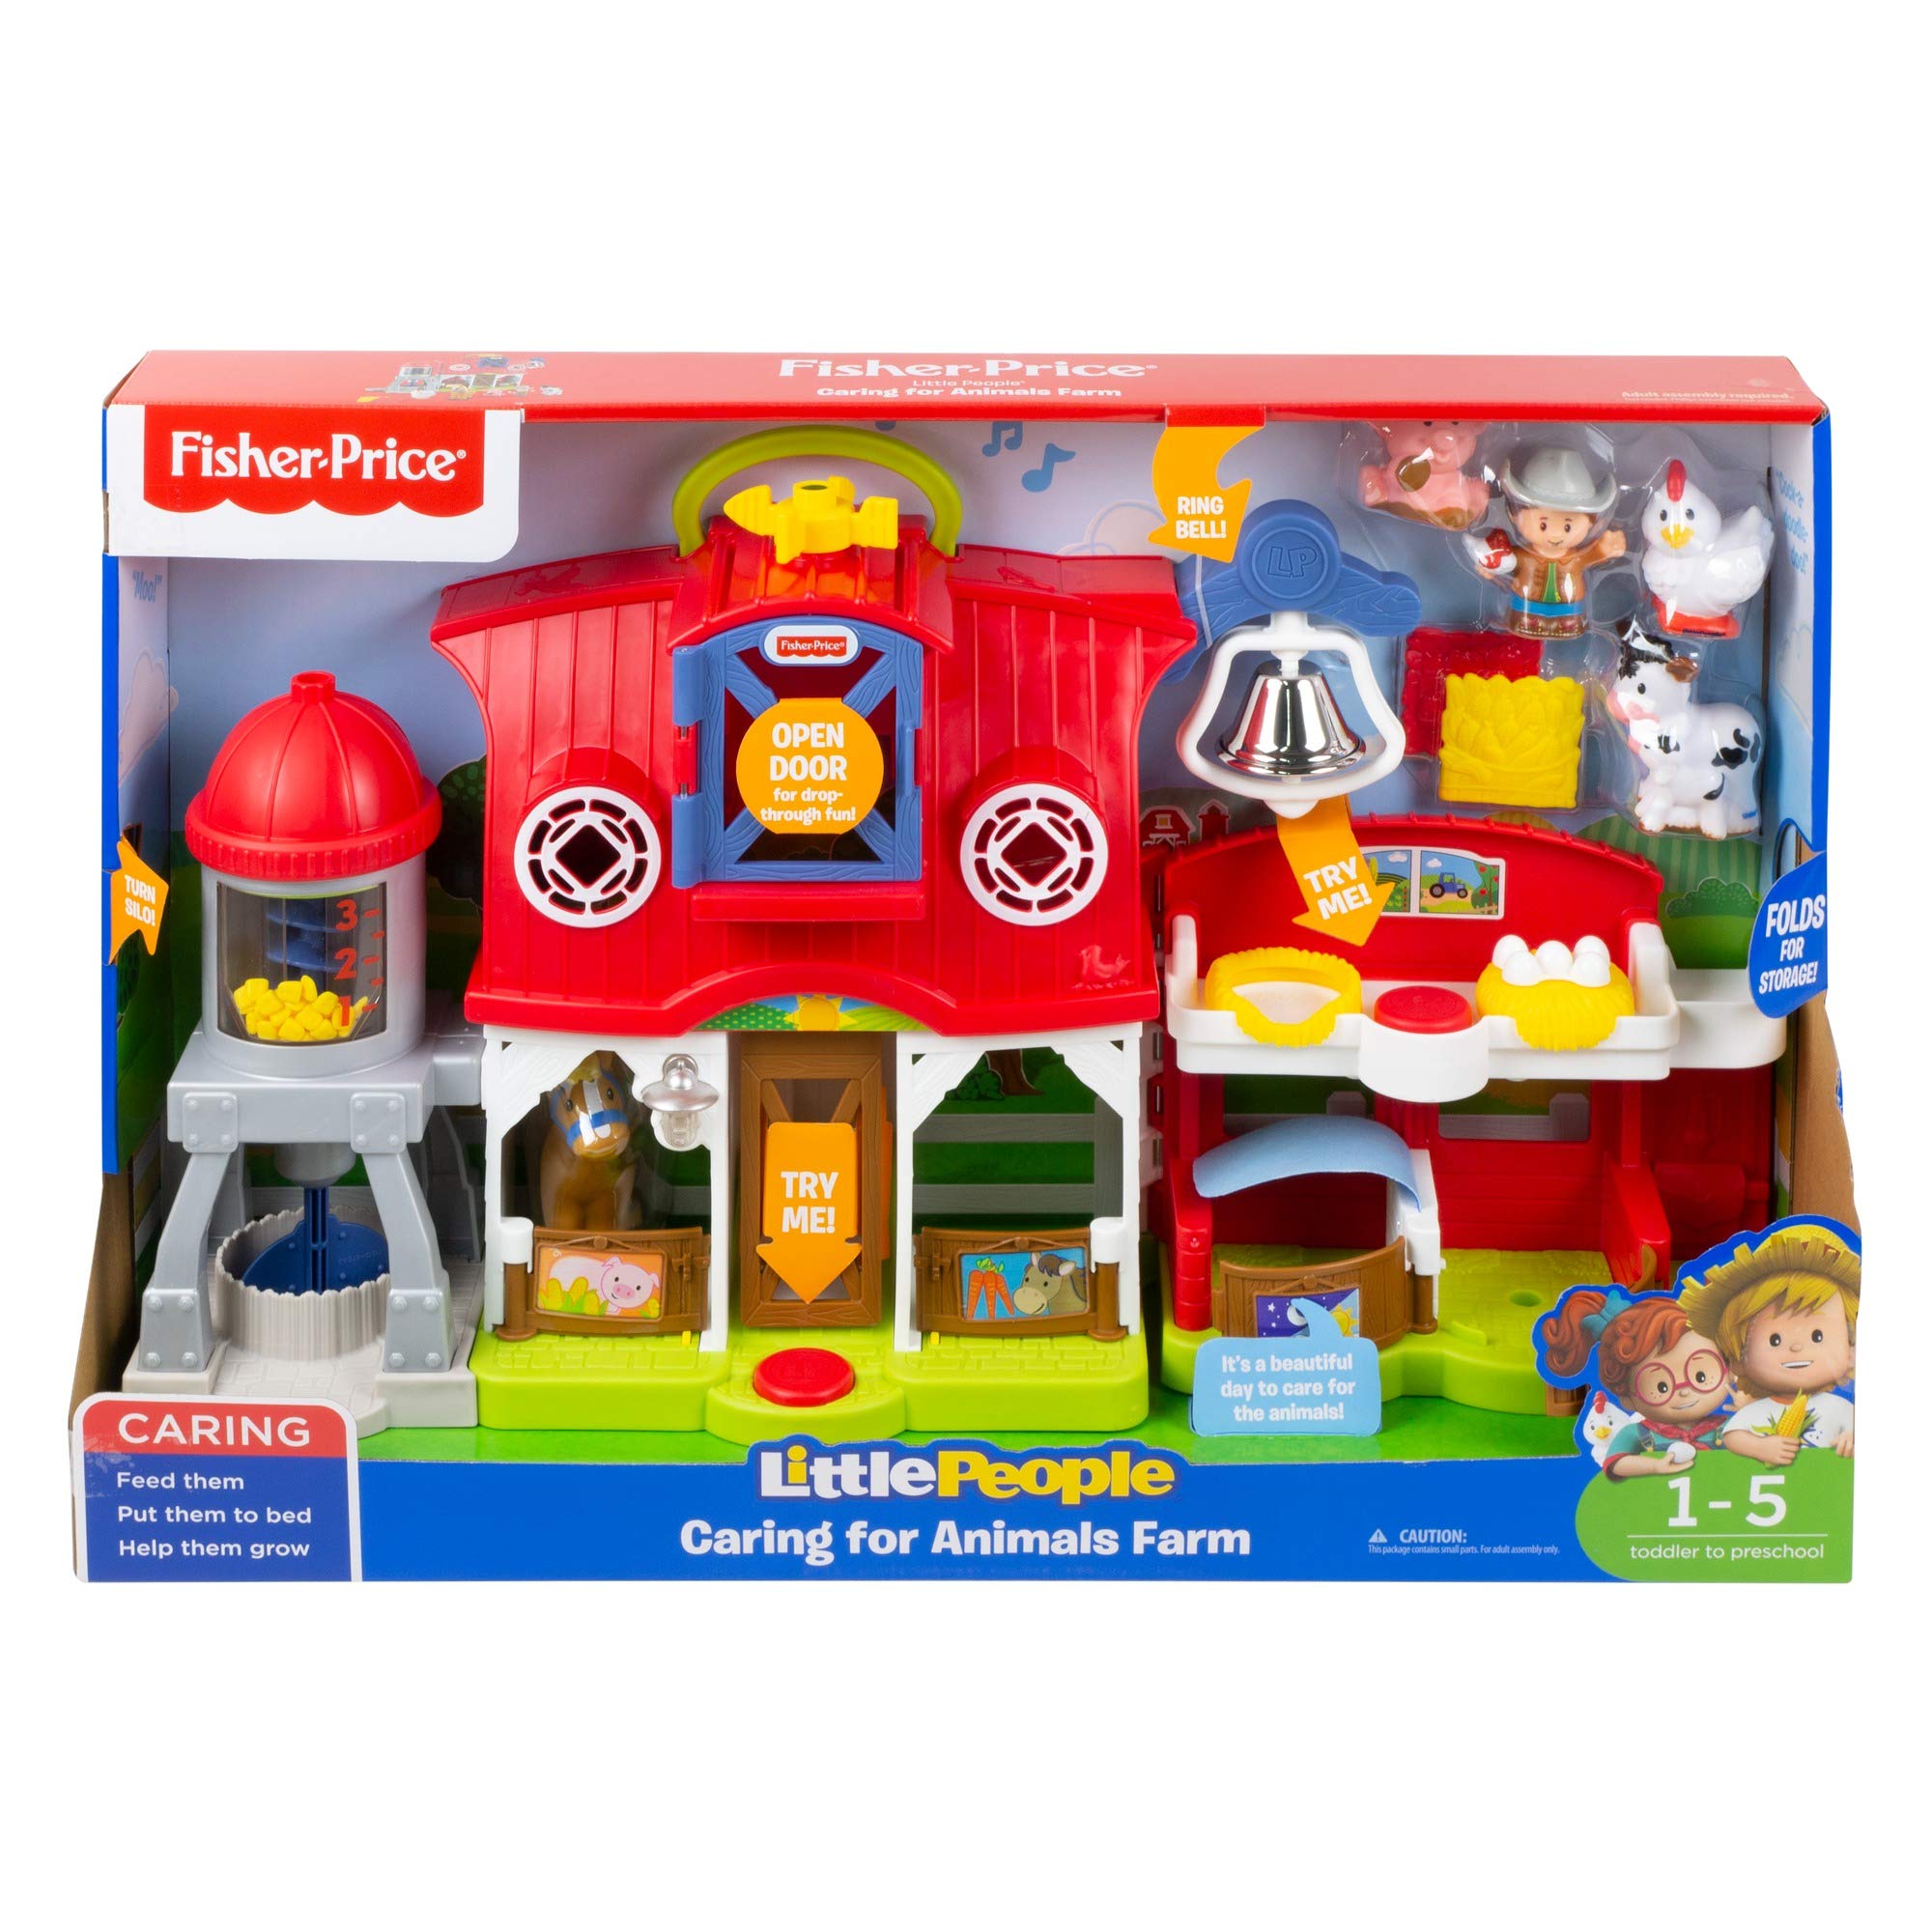 Fisher-Price Little People Caring for Animals Farm Set